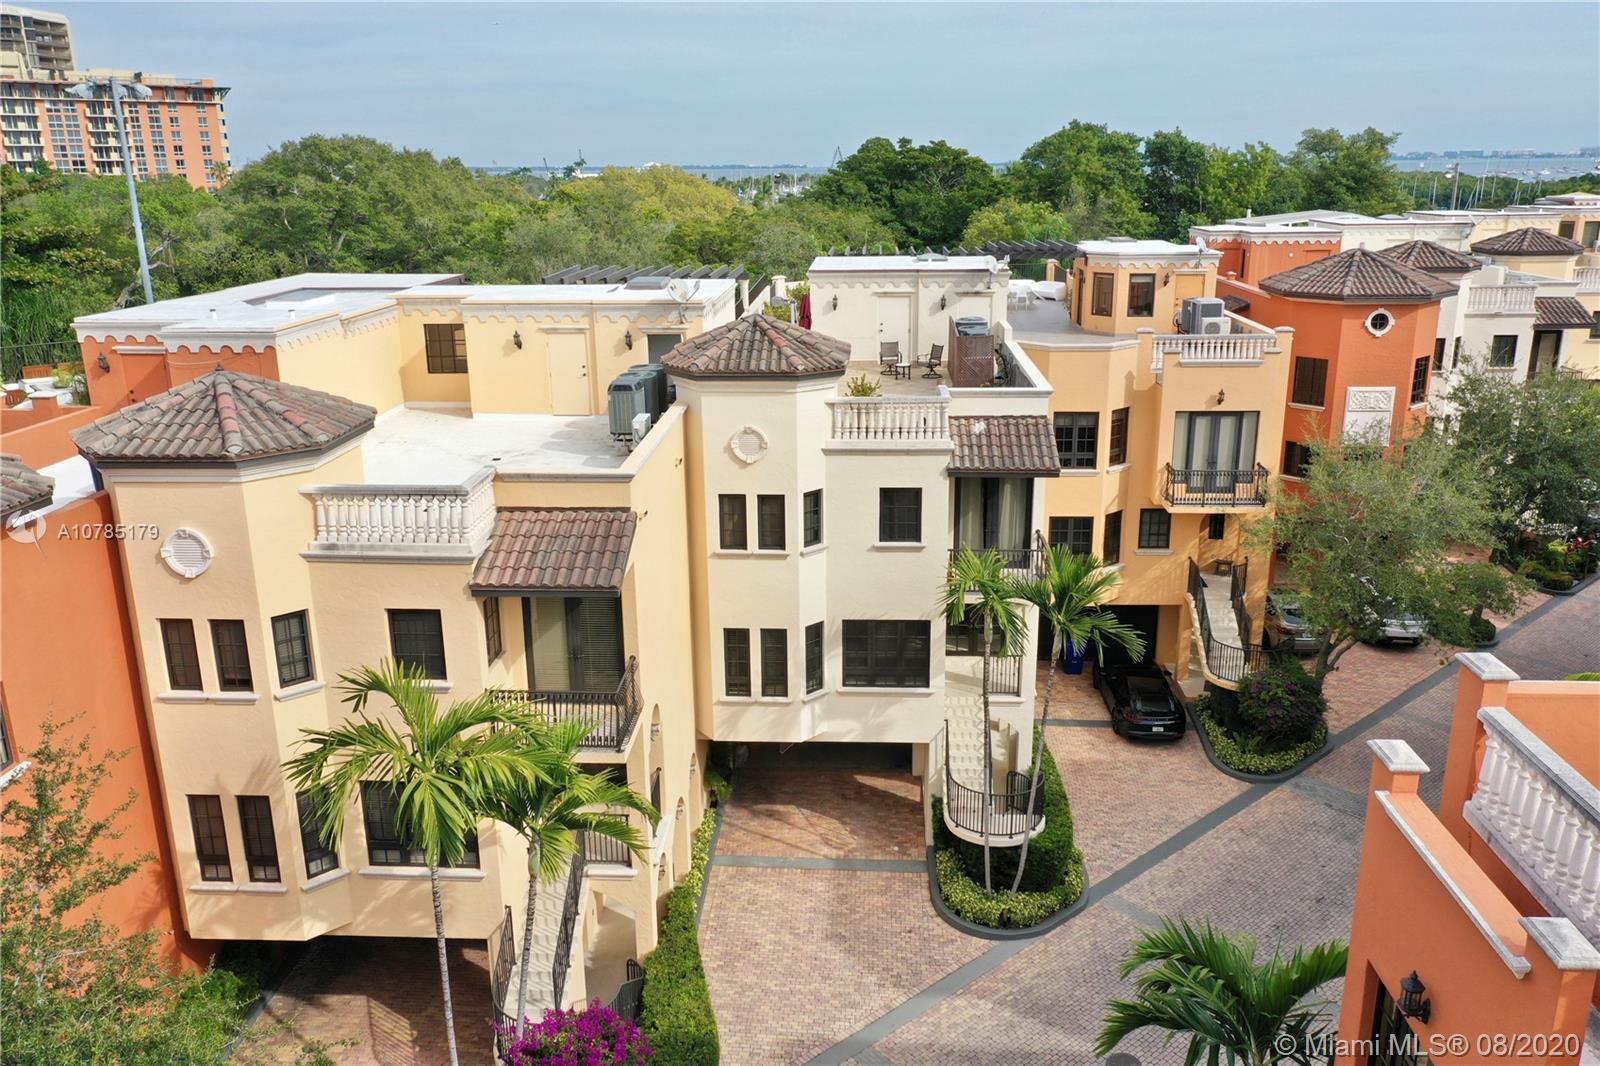 Rare opportunity in Cloisters on the Bay located in the heart of Coconut Grove and within walking distance to local stores, restaurants, and private schools. This oversized  5,650 sq ft unit is move in ready offering 4 bedrooms with en-suite bathrooms, living room, family room, as well as a full den, home office, wet-bar, laundry / utility room, and built closets. This home has 2 entrances, a private elevator, 4-car driveway and 2-car garage equipped with 220 power for electric vehicles. There is also plenty of room for storage throughout. The unit also features an expansive outdoor rooftop area that includes a hot tub and lots of space for outdoor dining and relaxing. The neighborhood itself features a clay tennis court, heated swimming pool, clubhouse, and 24 hour security. Easy to Show!